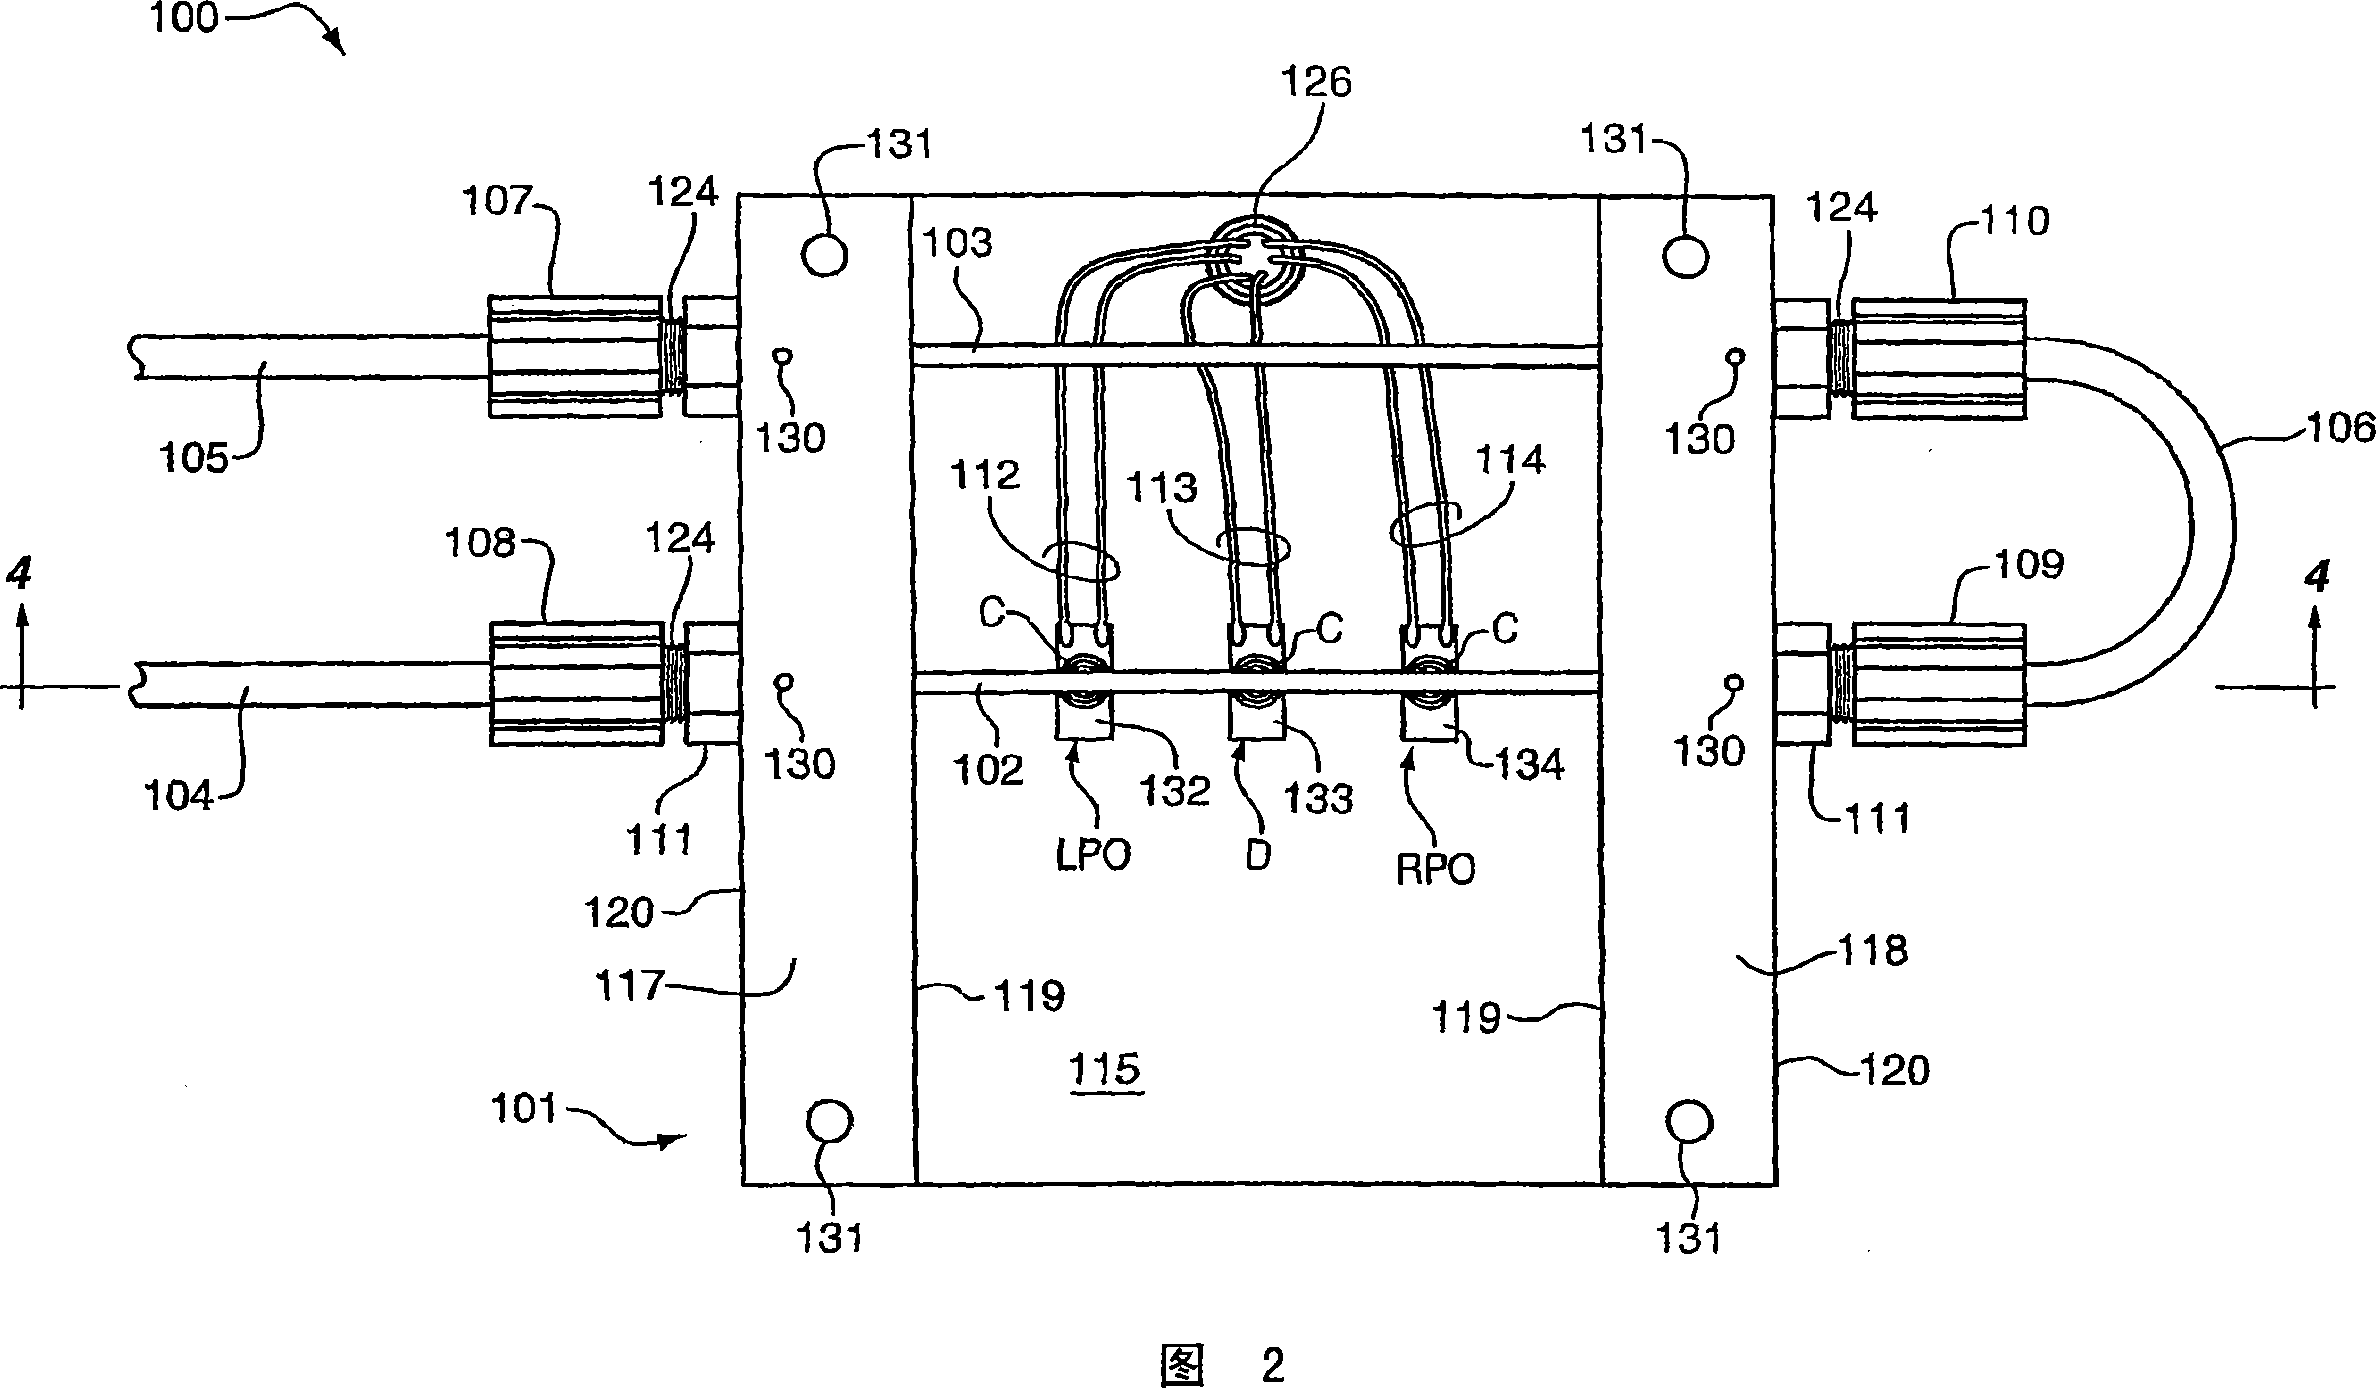 Compensation method and apparatus for a coriolis flow meter